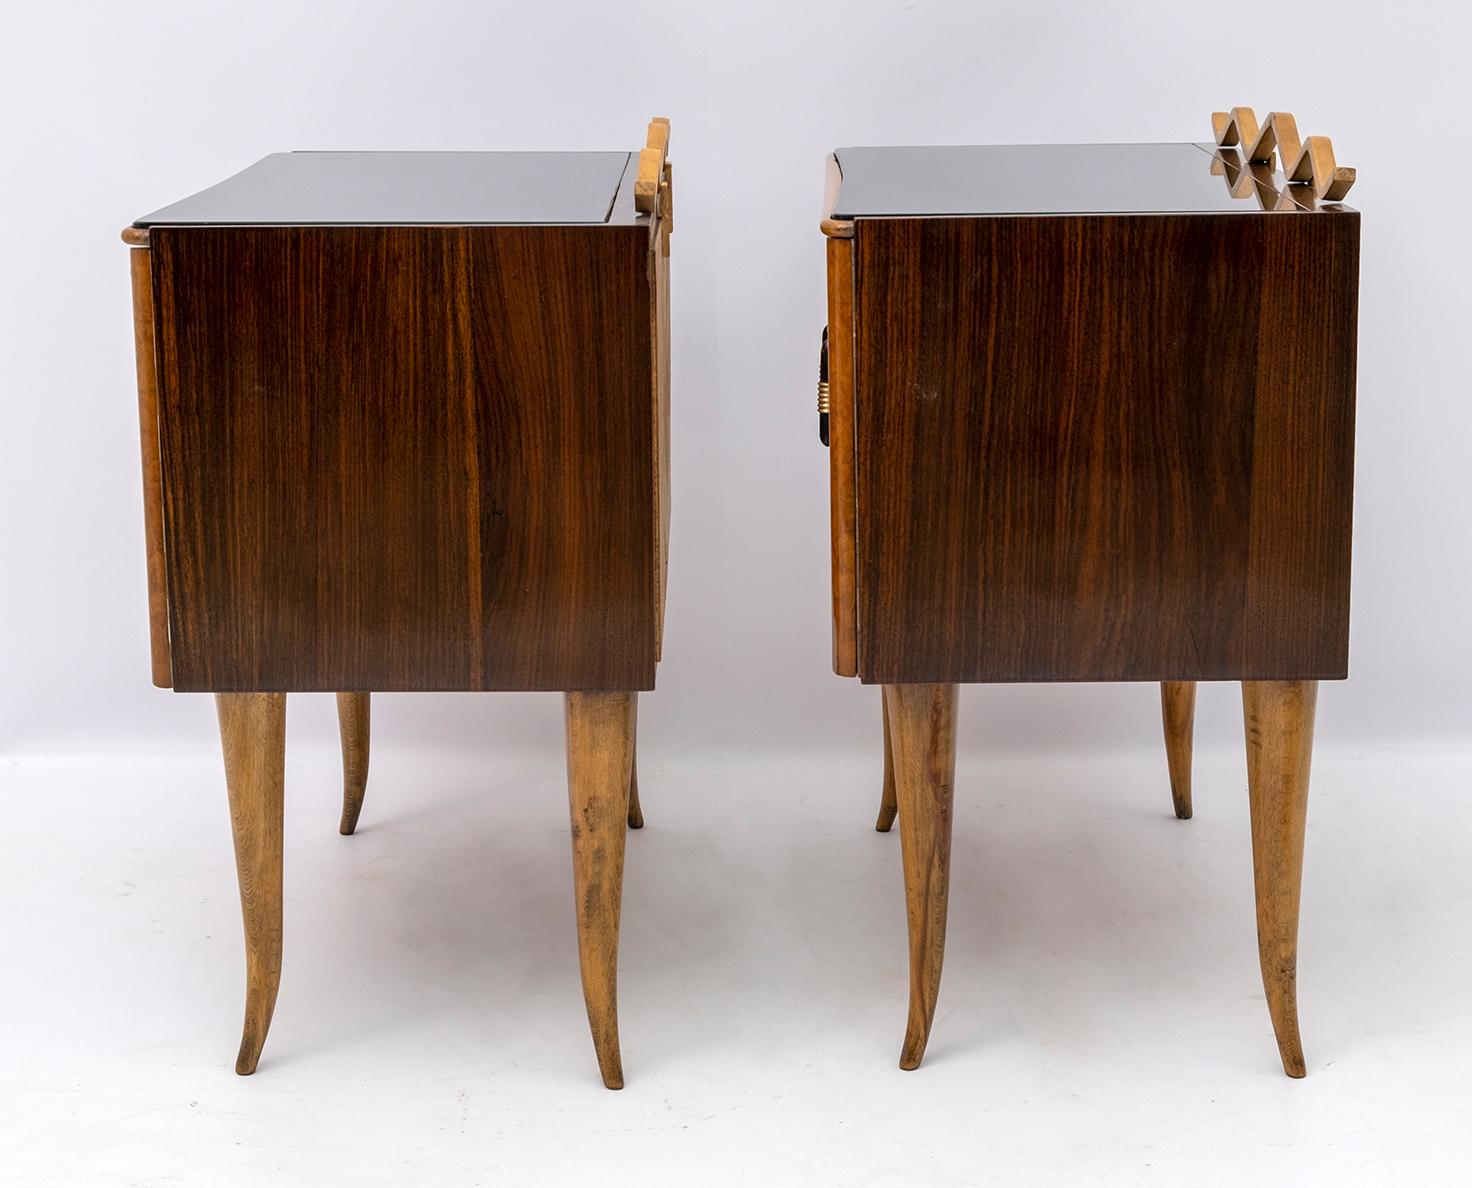 Glass Pair of Art Deco Italian Ash Briar and Walnut Bedside Tables, 1920s